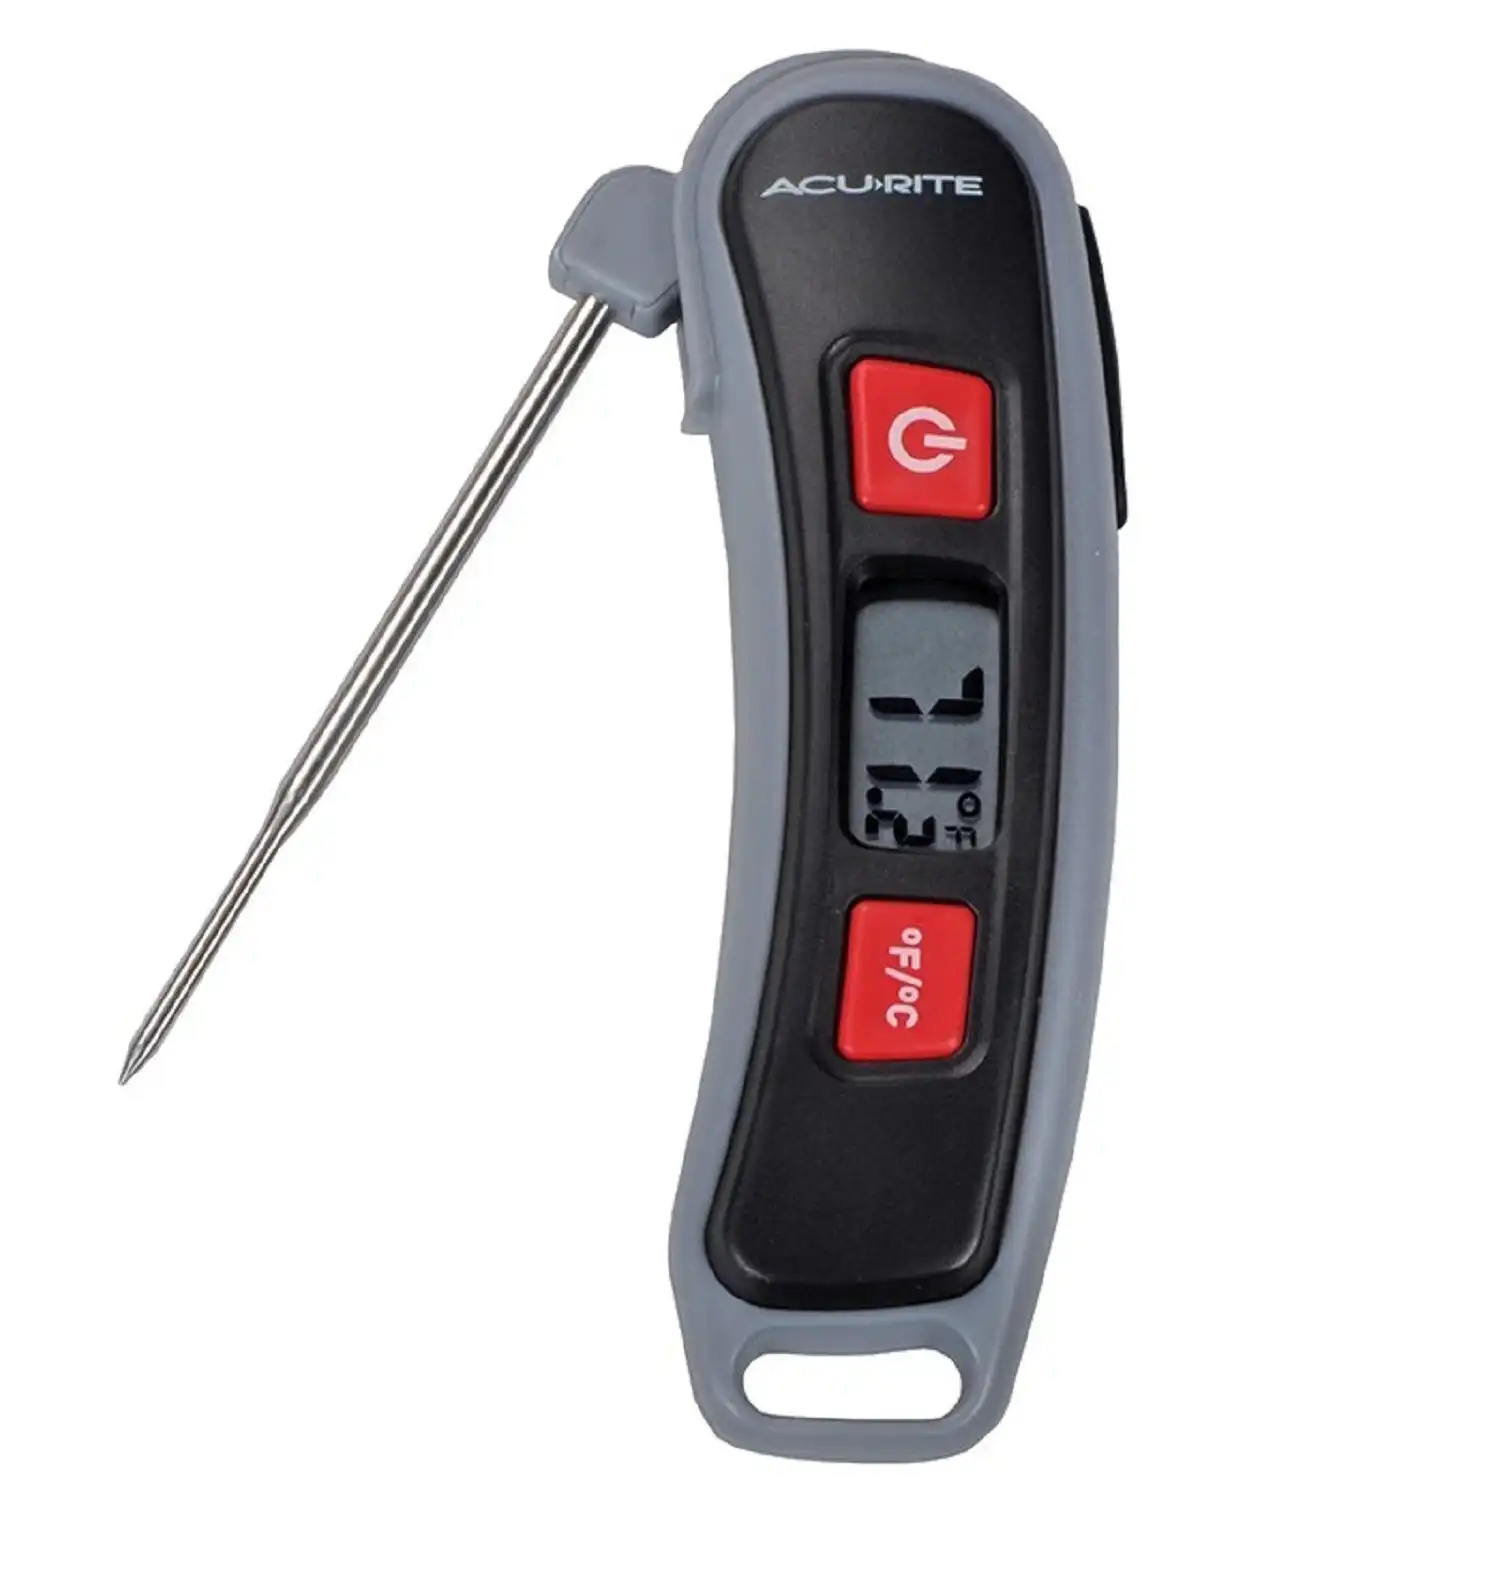 Digital Instant Read Thermometer